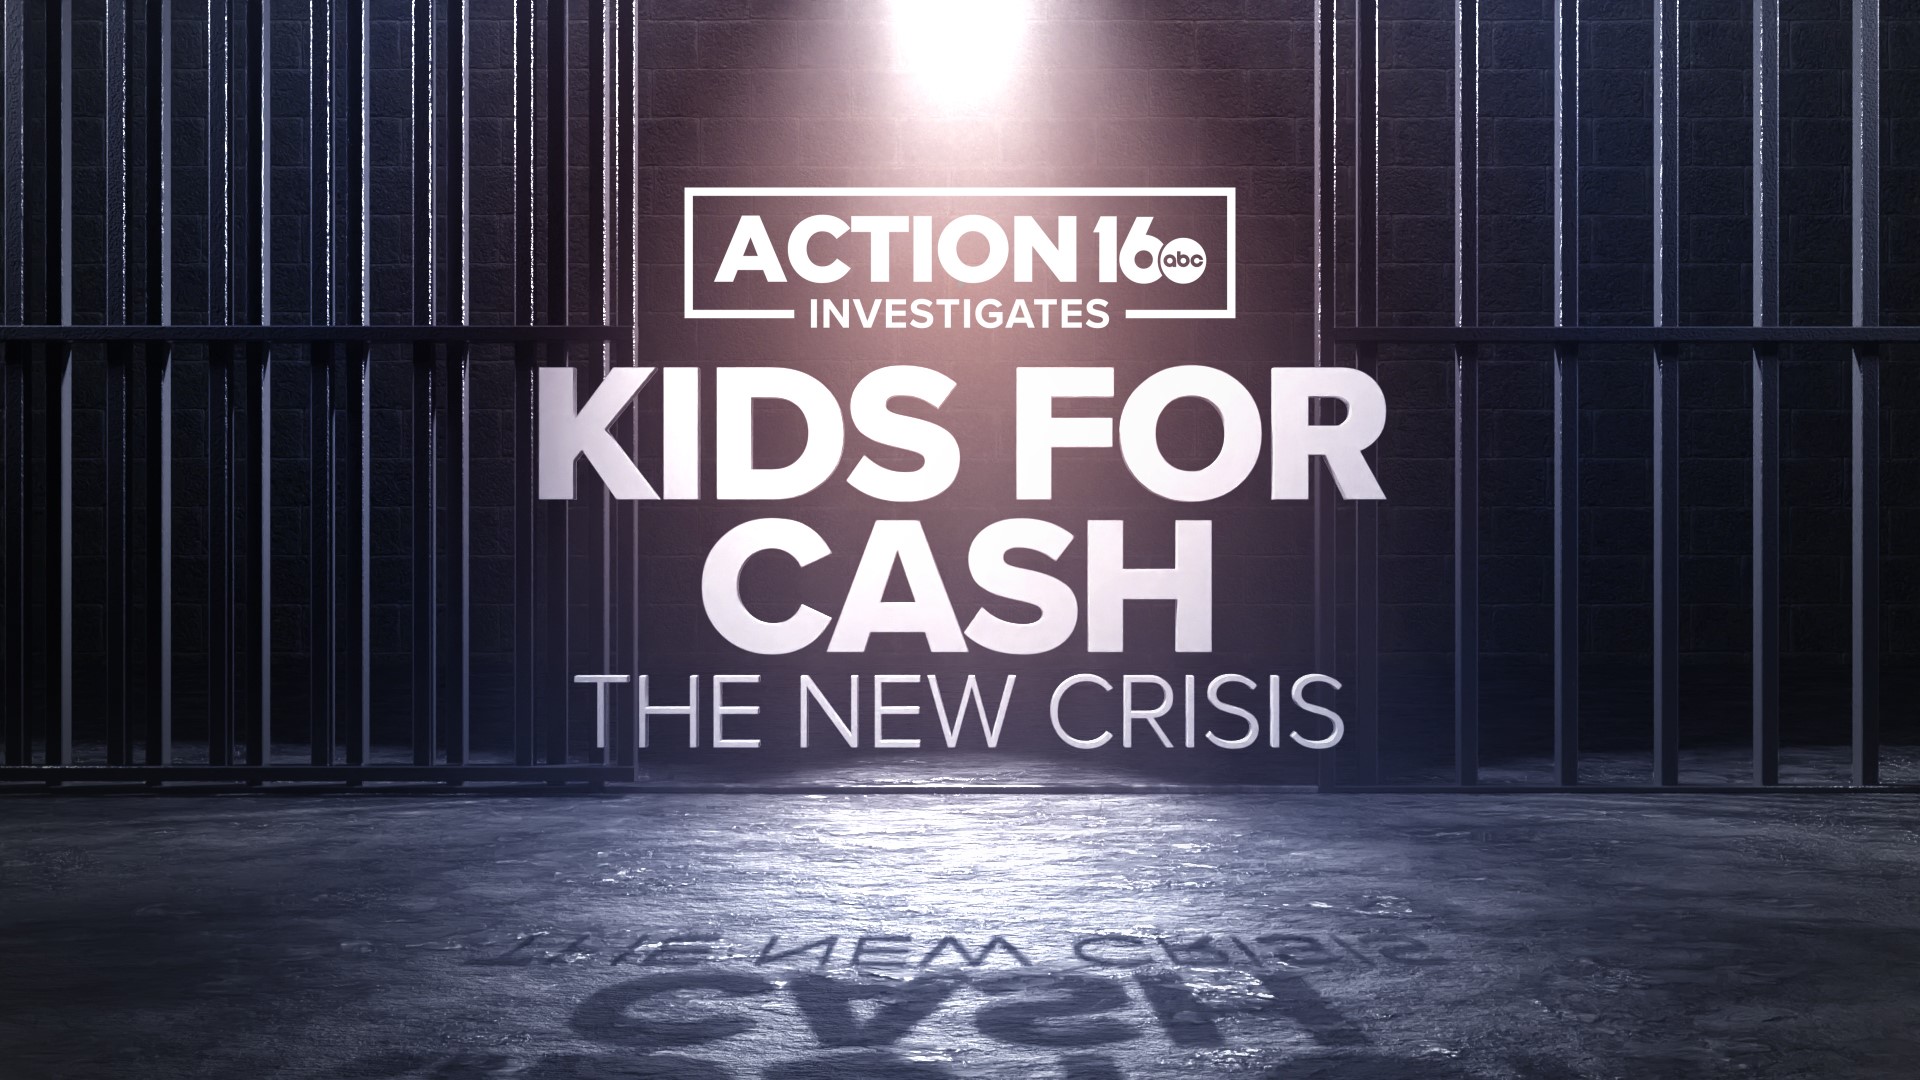 The effects of Kids for Cash are still felt to this day, as another crisis unfolds within the Juvenile justice system in Luzerne County and beyond.